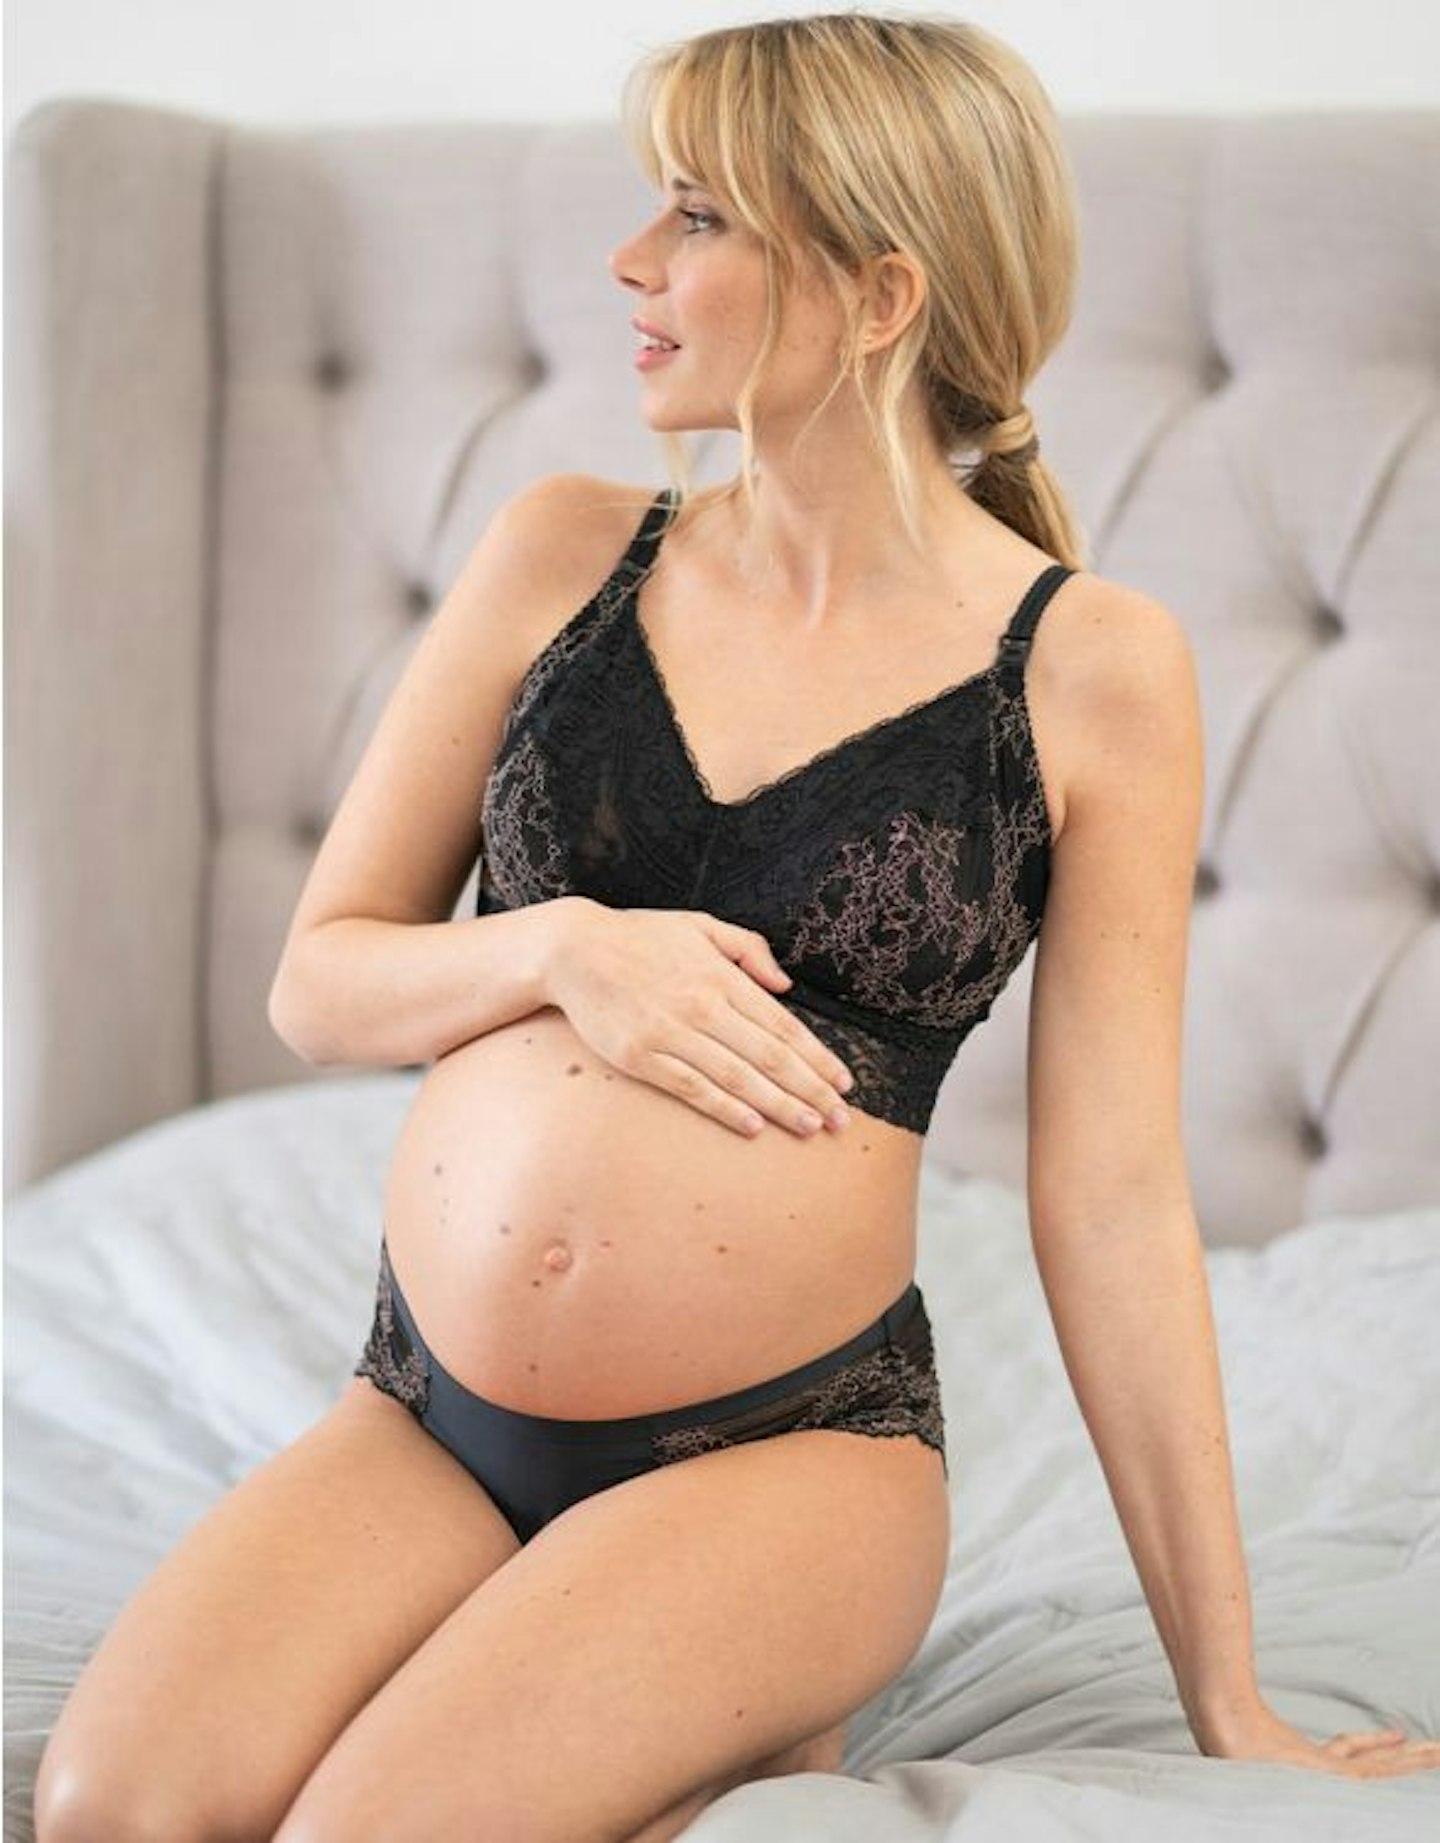 Where To Buy The Best Maternity Lingerie - For Comfort And Sexy